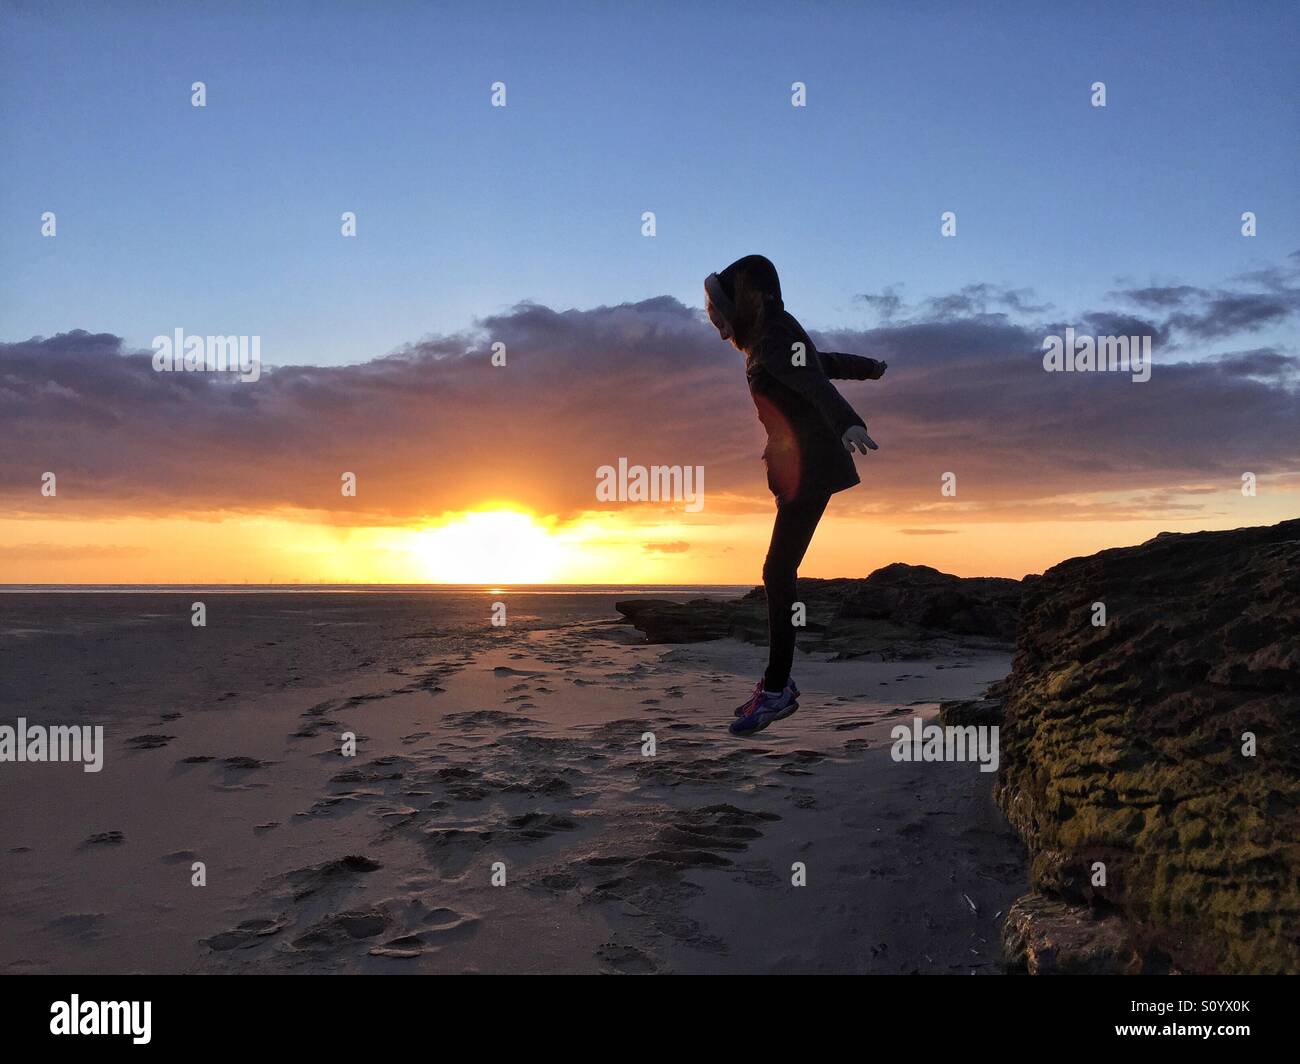 Girl jumping from rocks to sand in front of sunset Stock Photo